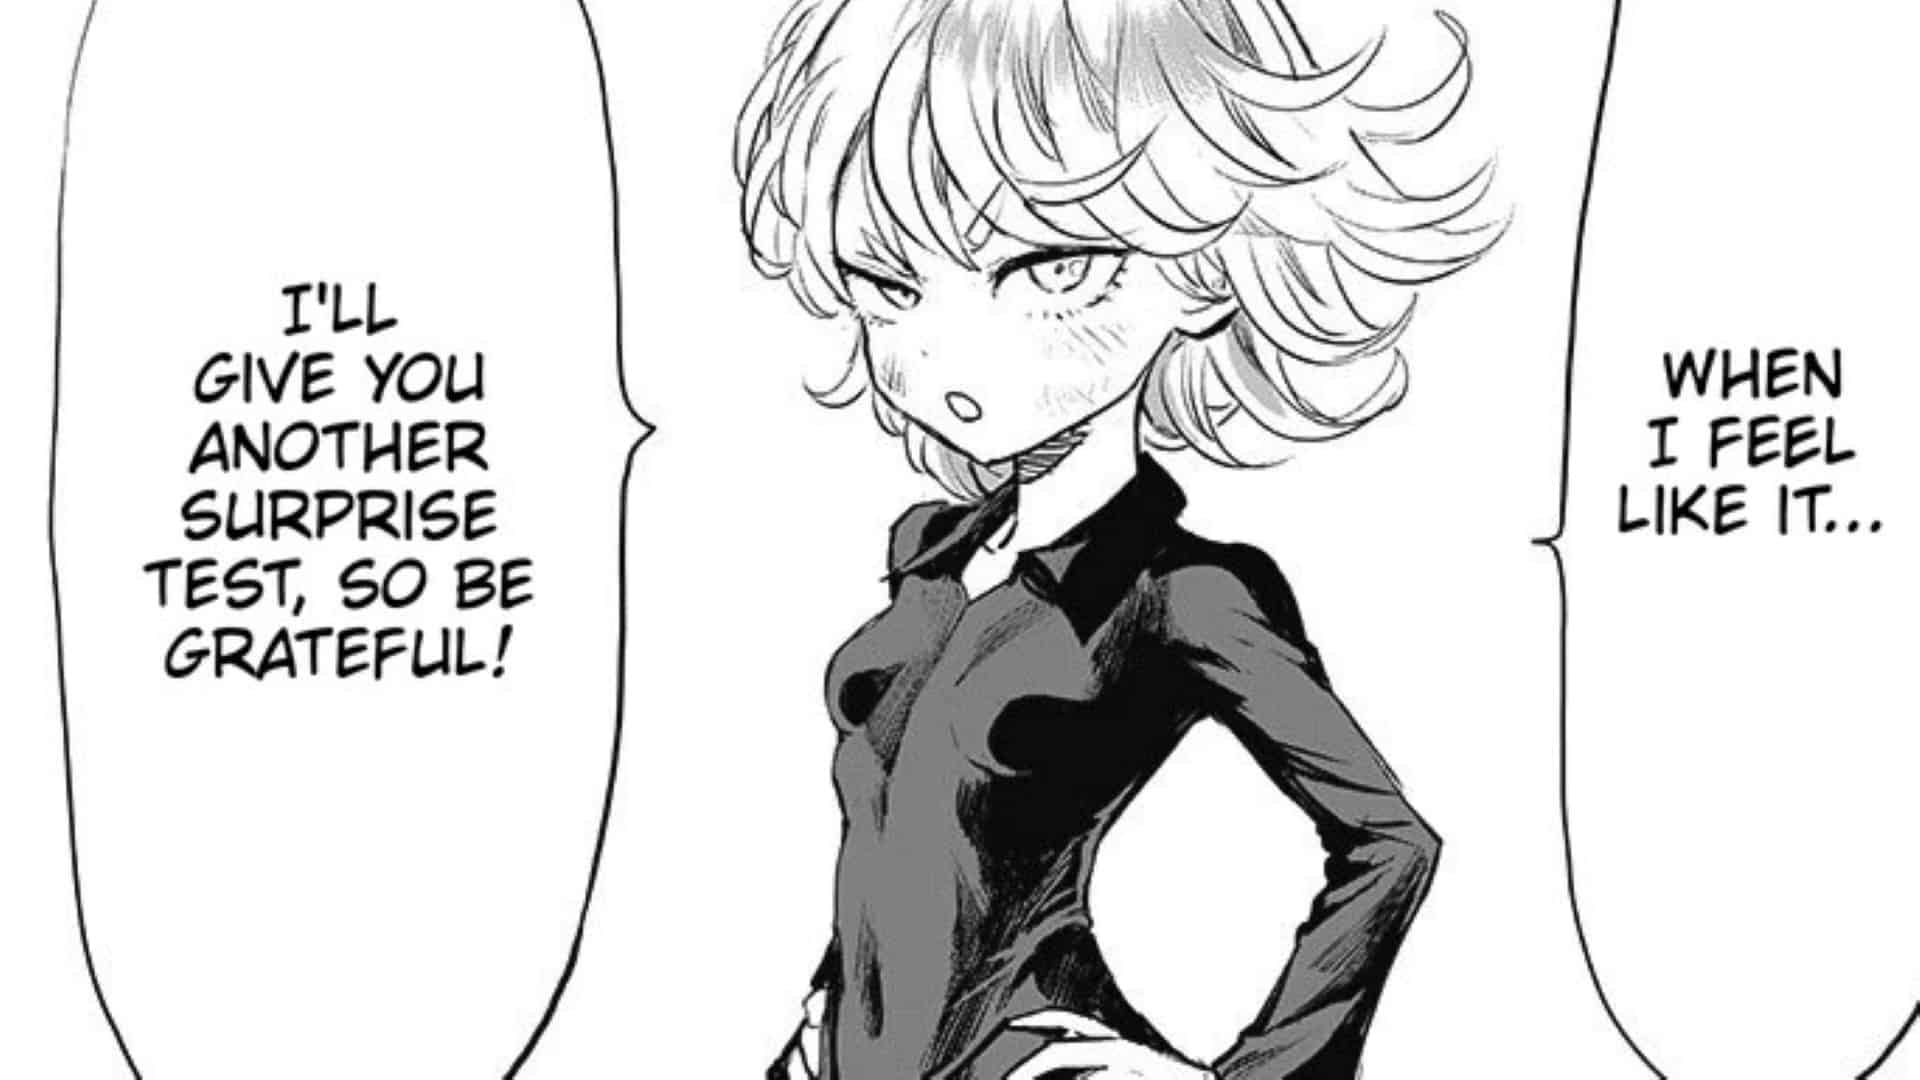 Tatsumaki After Waking Up After Her Fight With Saitama - One Punch Man Chapter 182